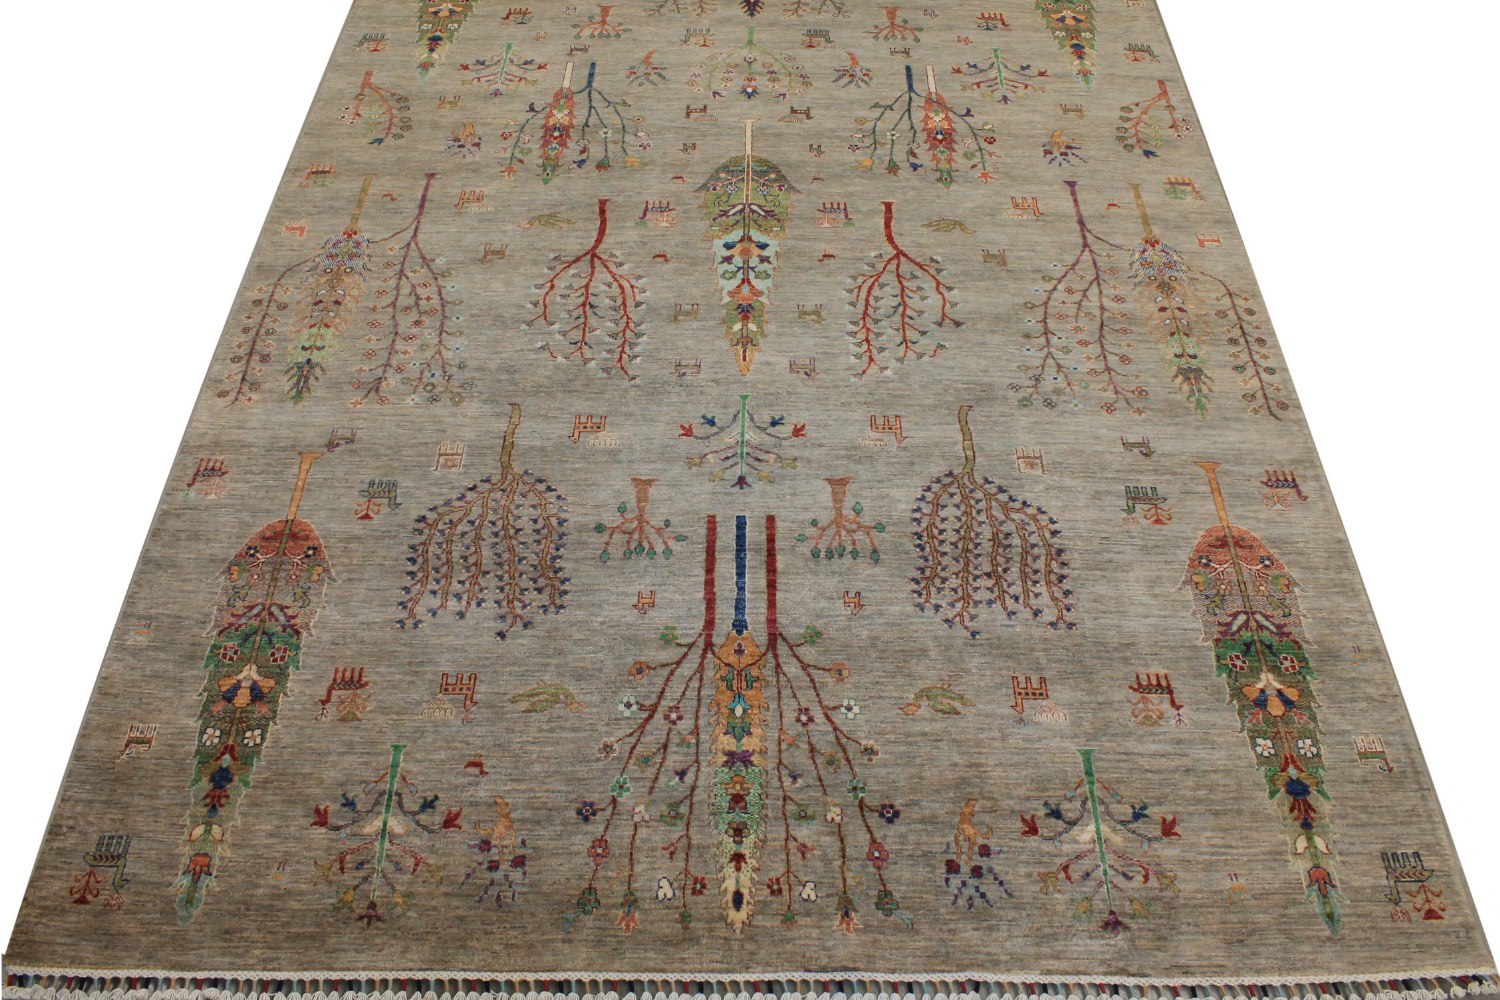 9x12 Aryana & Antique Revivals Hand Knotted Wool Area Rug - MR026364